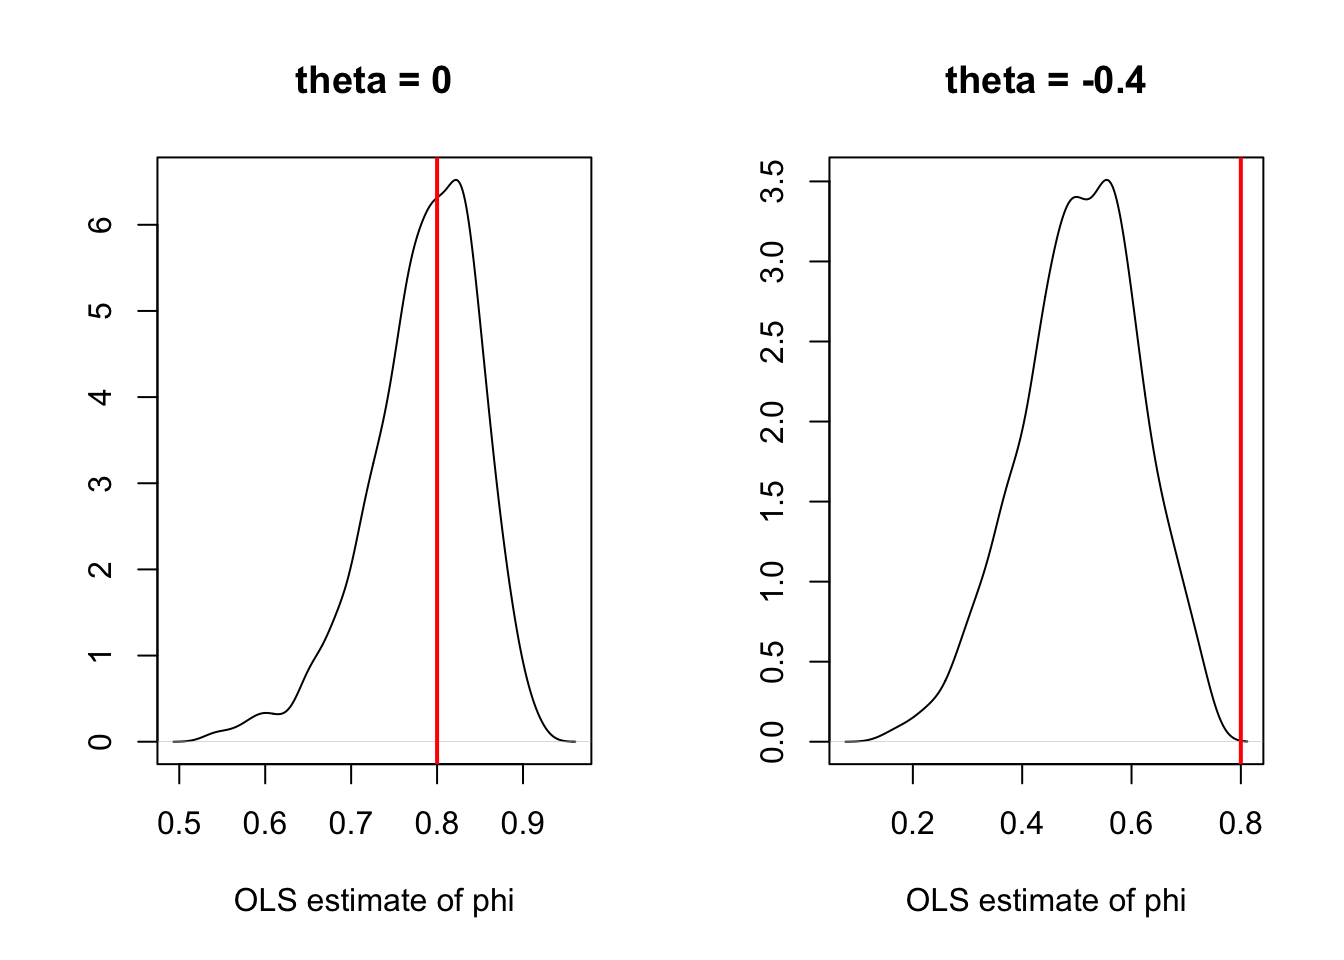 Illustration of the bias obtained when estimating the auto-regressive parameters of an ARMA process by (standard) OLS.